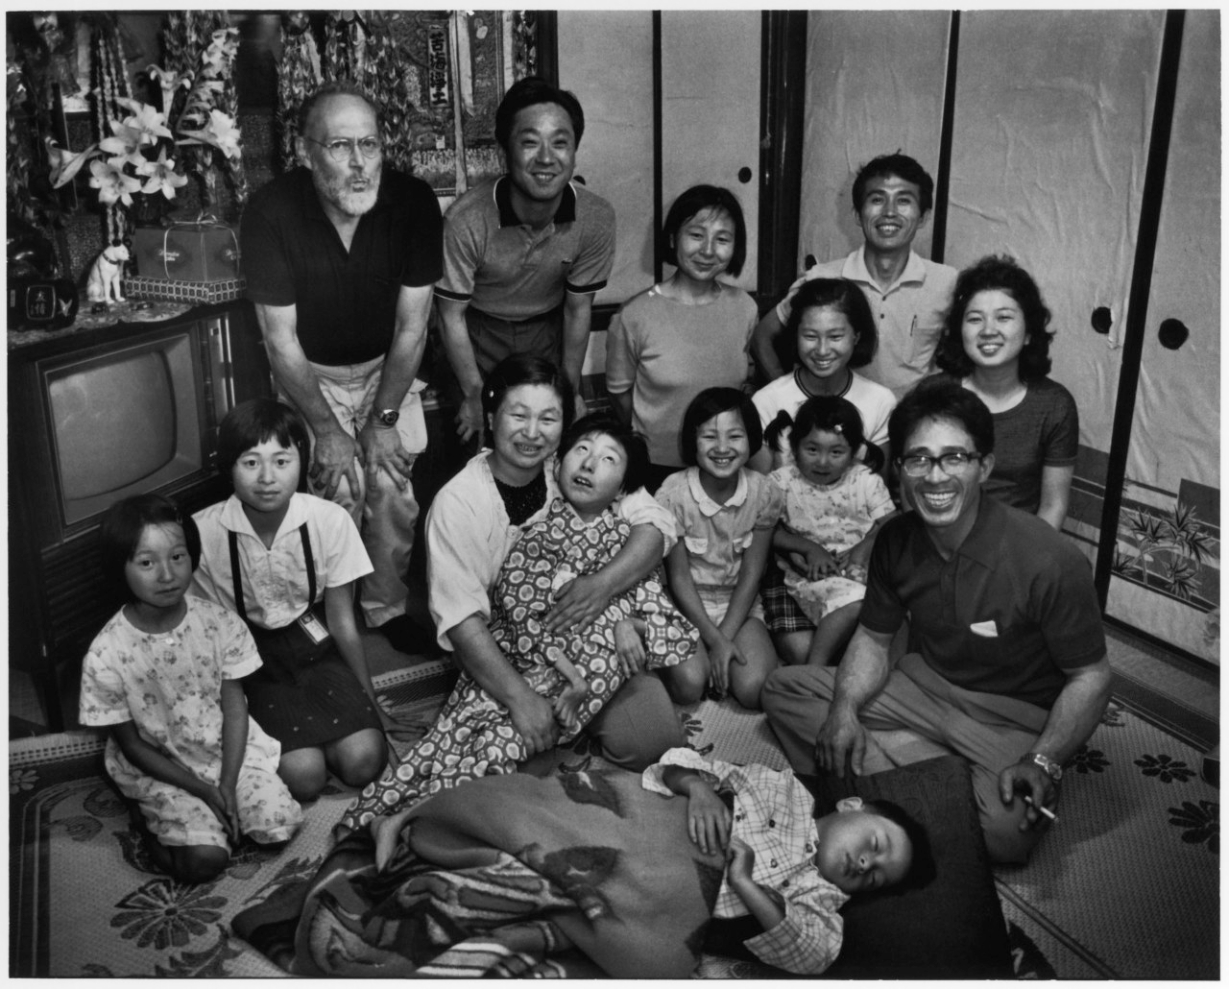 Tomoko with her family, supporters, Gene, and Asahi Camera editor, taken at Tomoko’s home in Minamata on her sixteenth birthday. Photo by Aileen M. Smith. June 13, 1972.